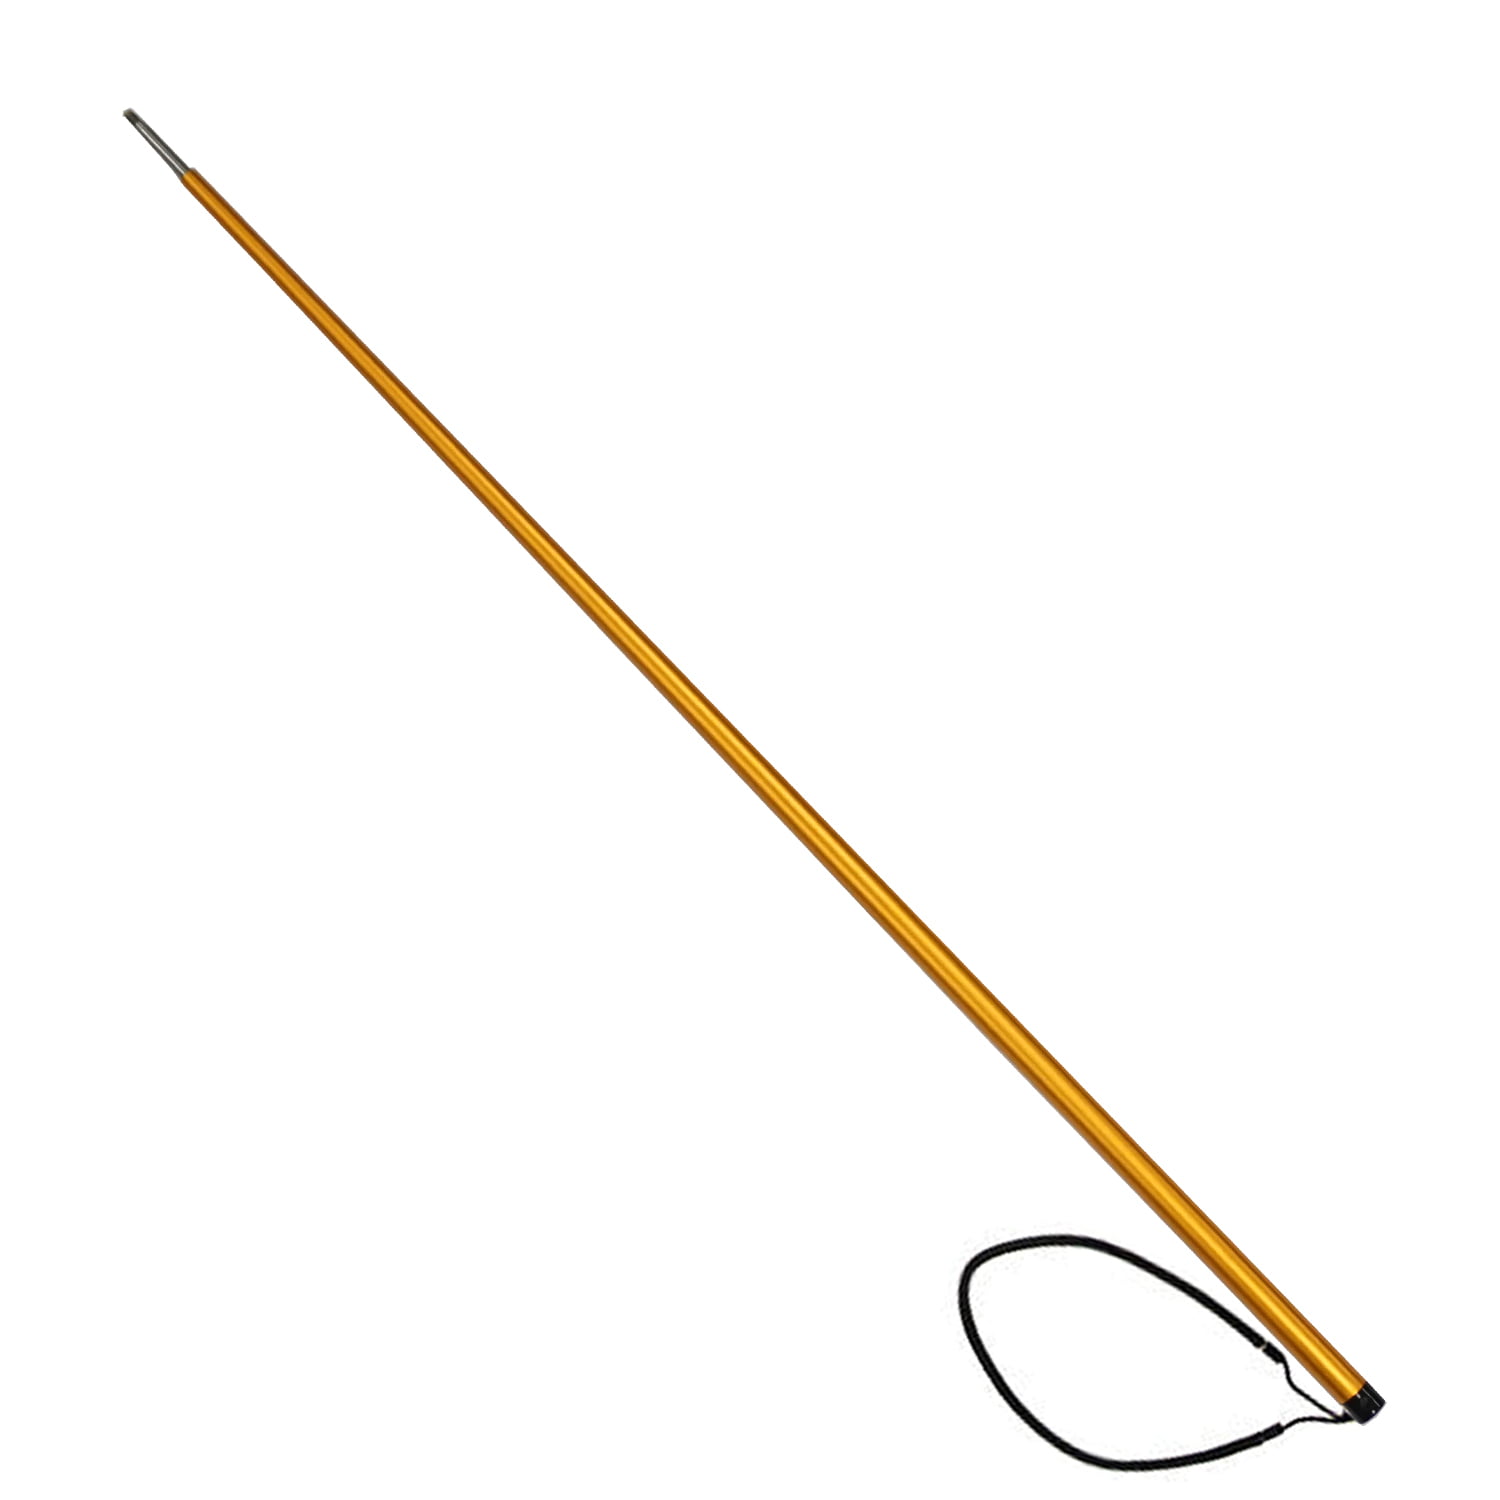 Without Speartip Scuba Choice Gold Aluminum 3ft Pole Spear 